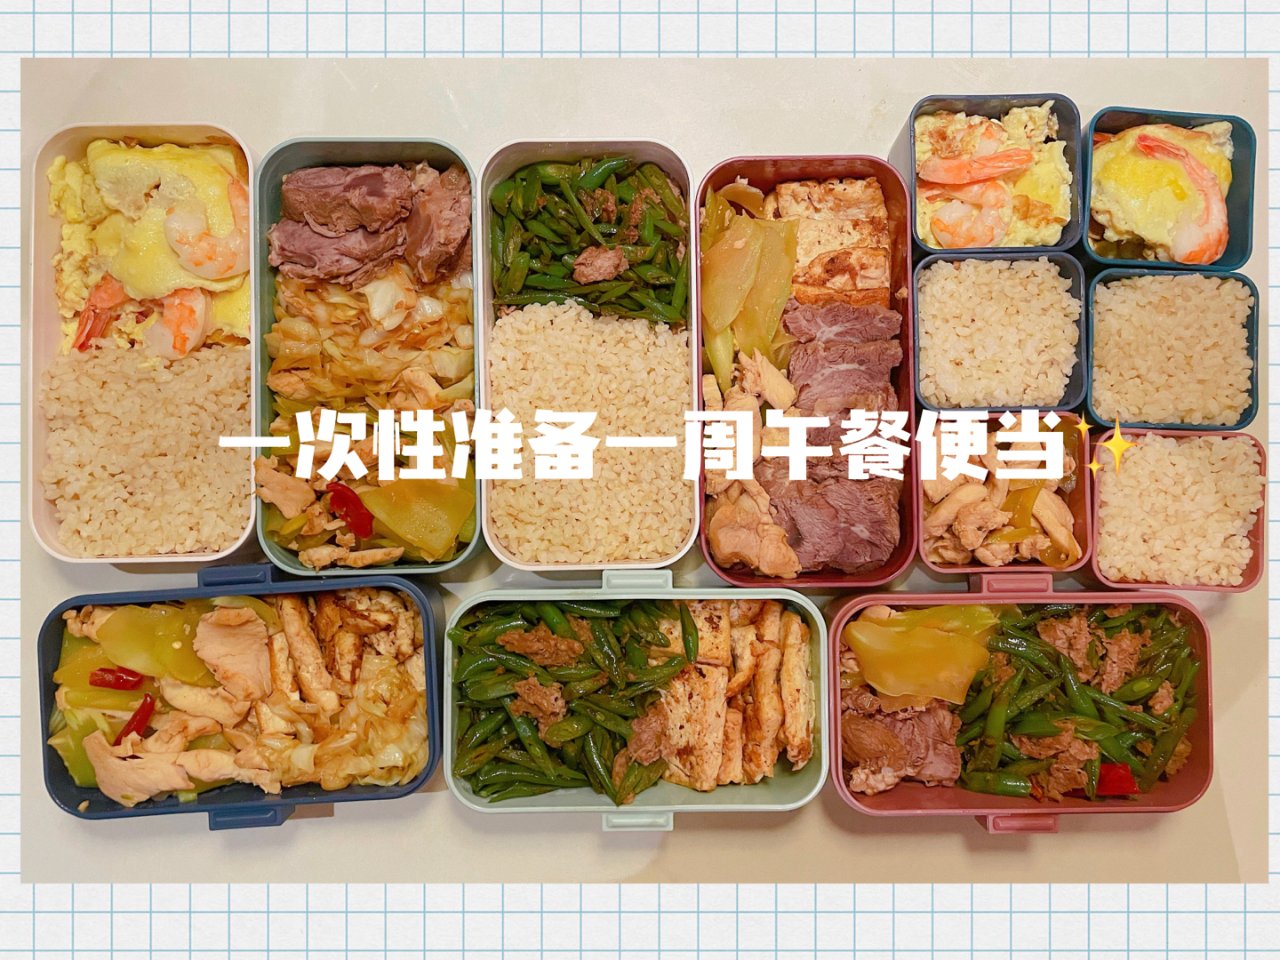 monbento - MB Original bento lunch box – Lunch boxes for women and men